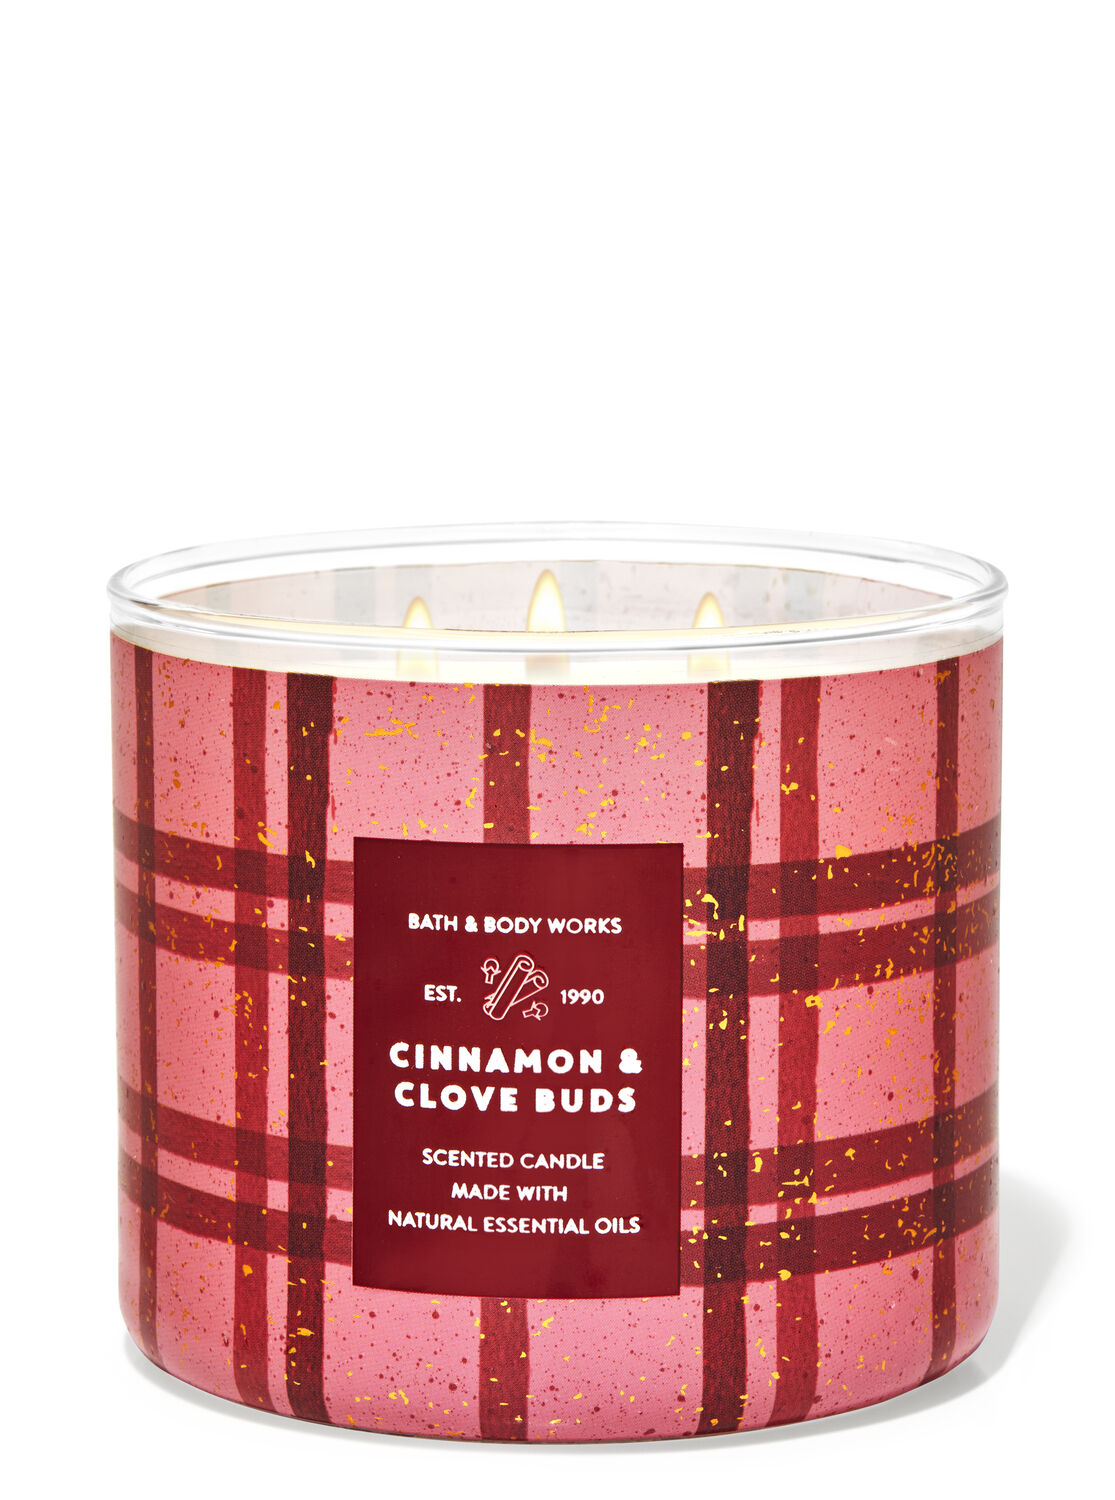 2 Bath & Body Works CINNAMON CLOVE BUDS 3-Wick Scented Wax Large Candle 14.5 oz 